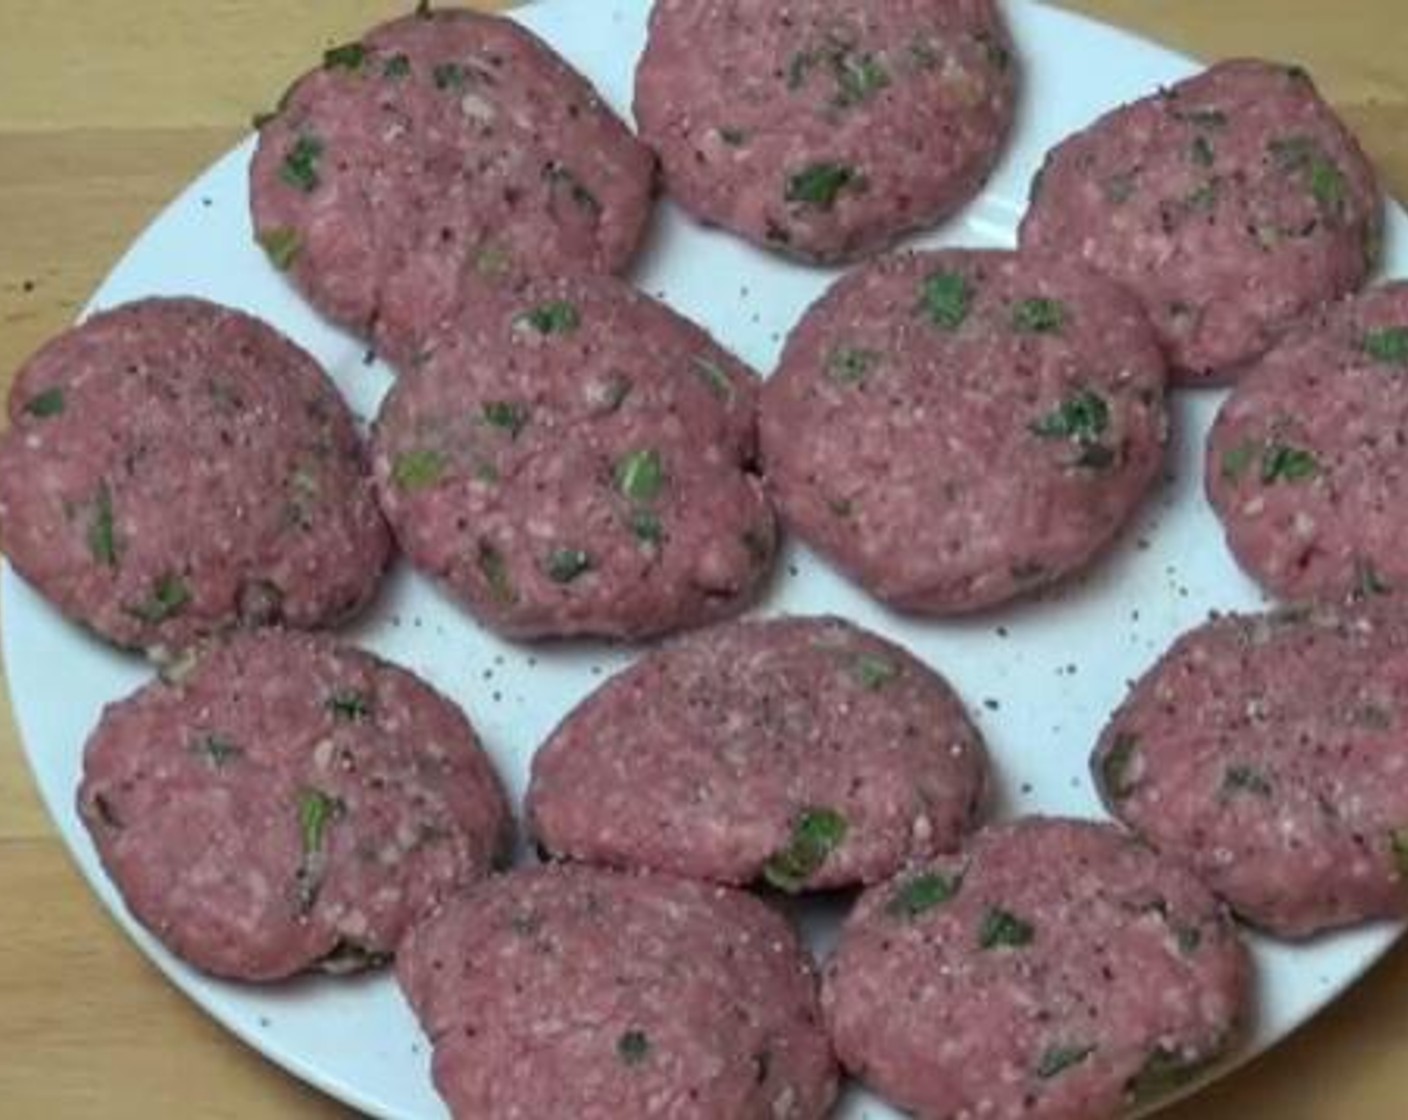 step 2 Divide the mixture into four even portions. Make 3 patties from each portion, and place them on a separate dish. Season with Salt (to taste) and Ground Black Pepper (to taste).